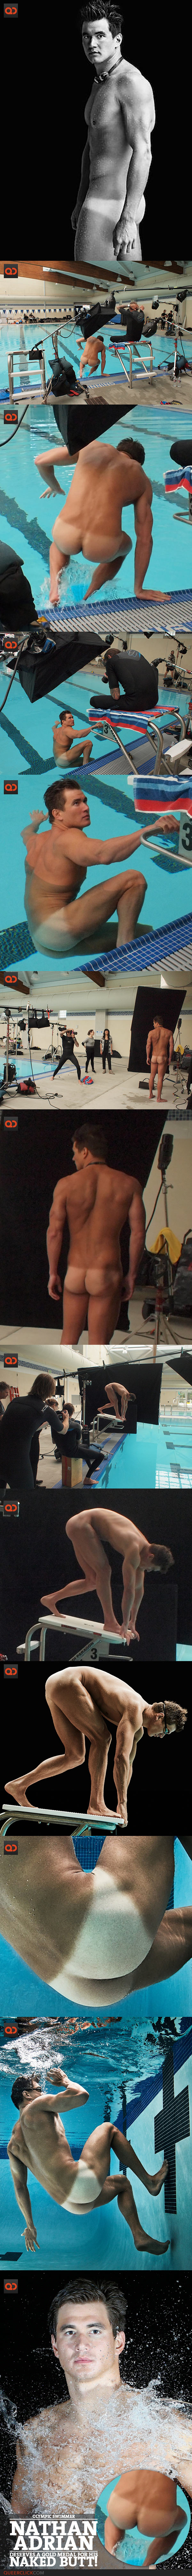 qc-olympic_swimmer_nathan_adrian_naked-collage02